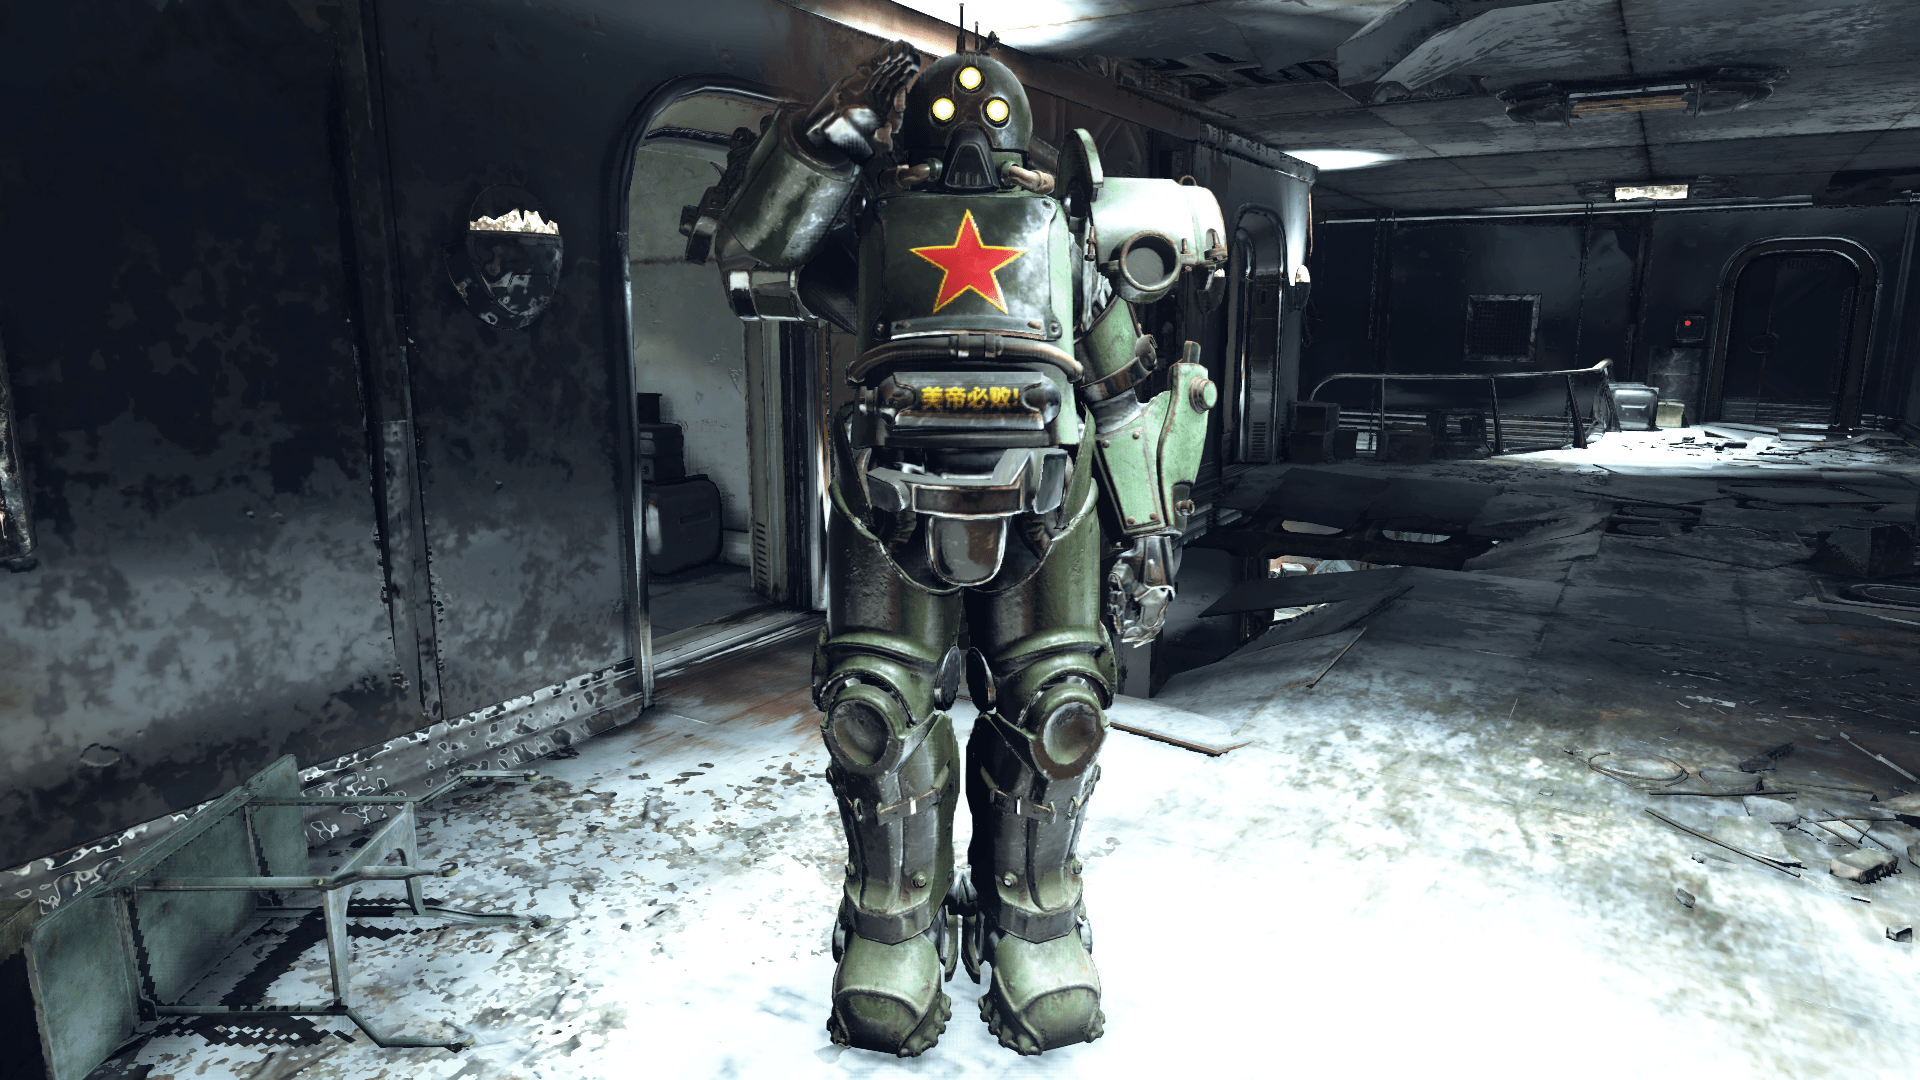 Silent Red Shift Power Armor - Fallout 76 Mod download.